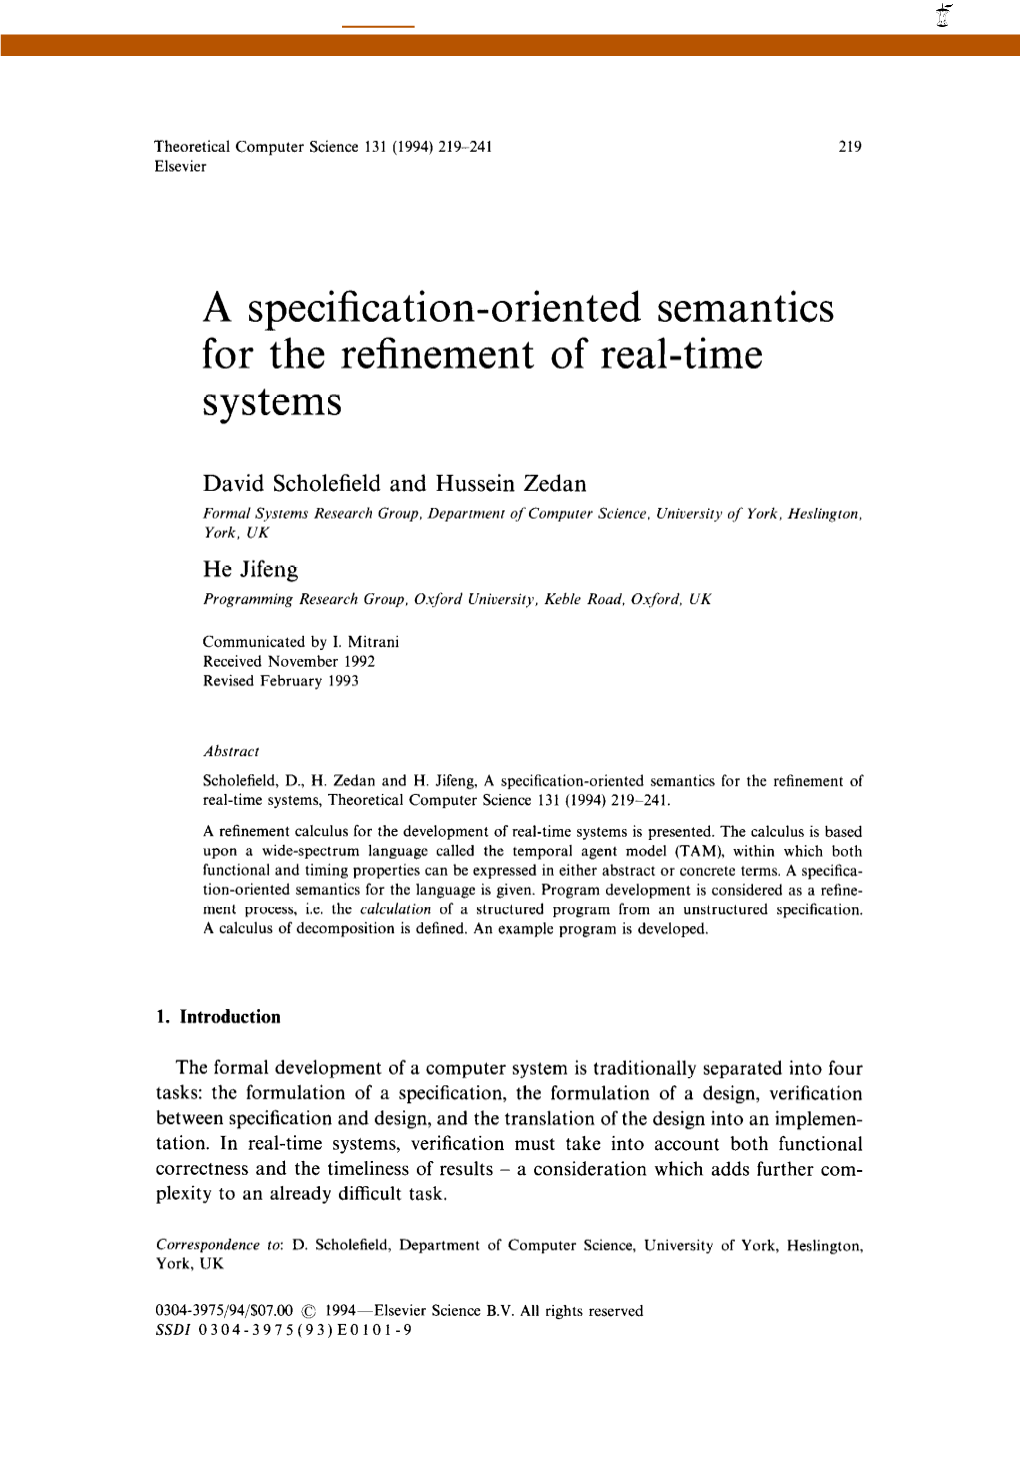 A Specification-Oriented Semantics for the Refinement of Real-Time Systems